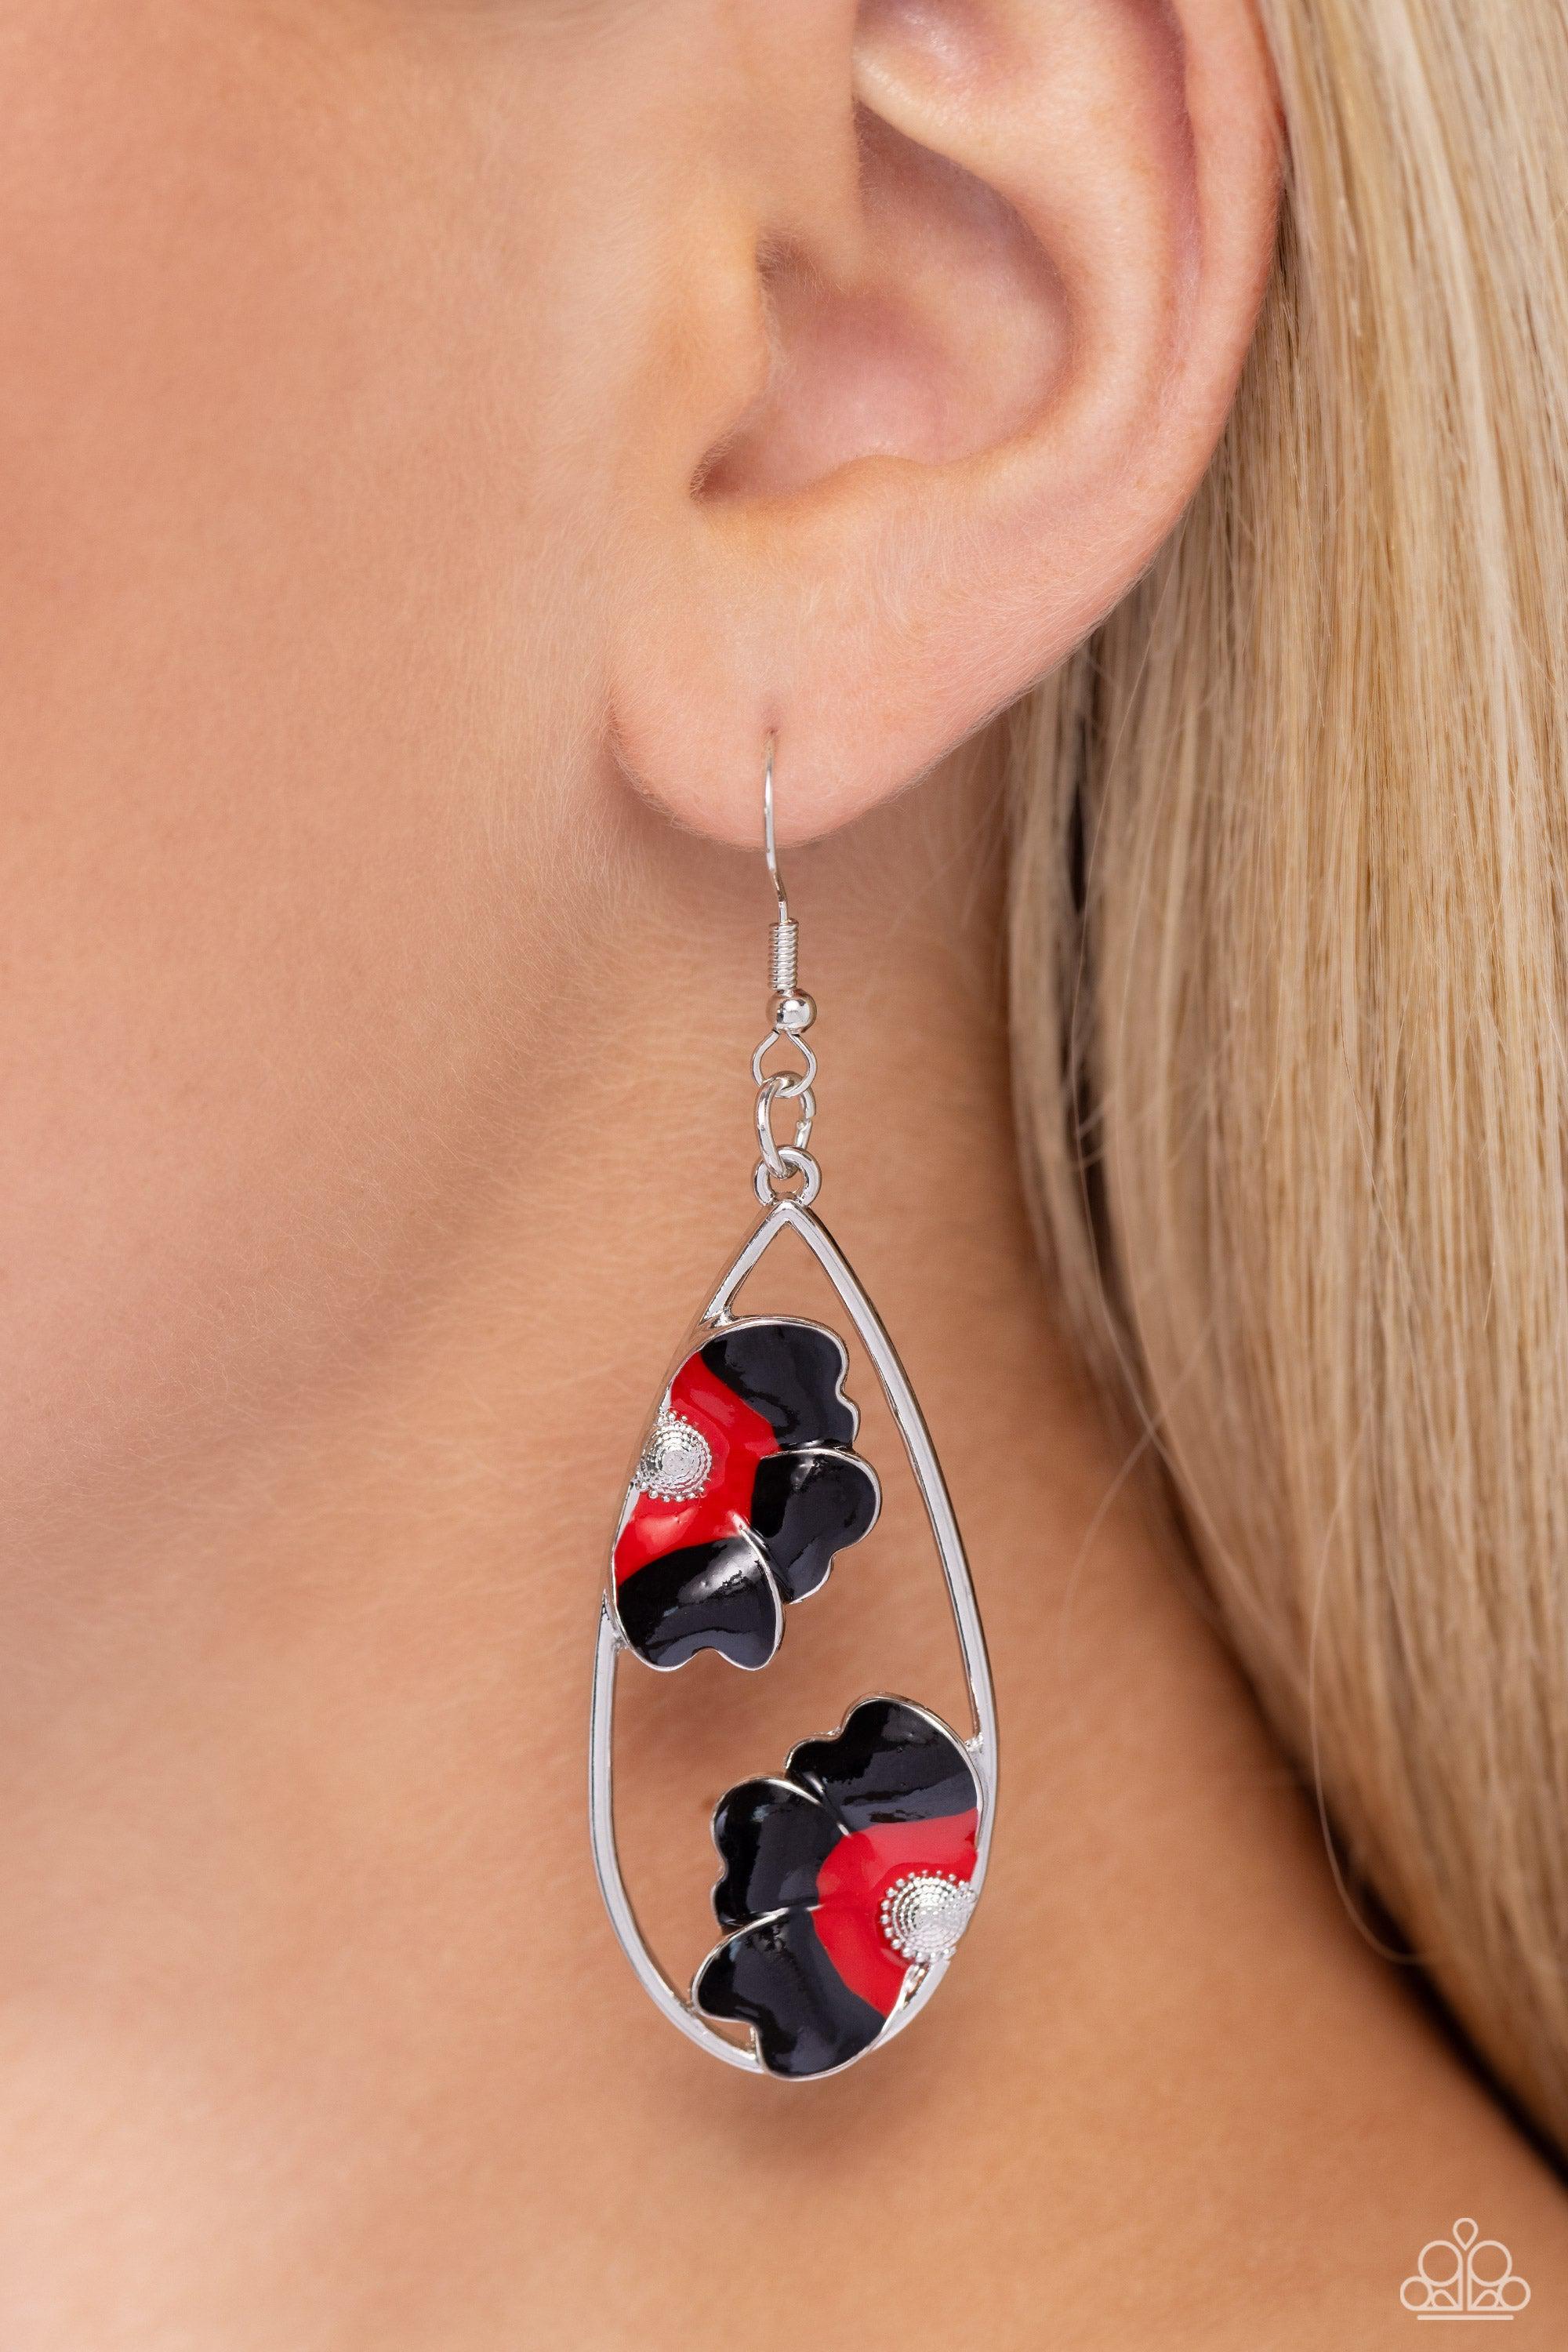 Airily Abloom Black & Red Flower Earrings - Paparazzi Accessories- lightbox - CarasShop.com - $5 Jewelry by Cara Jewels